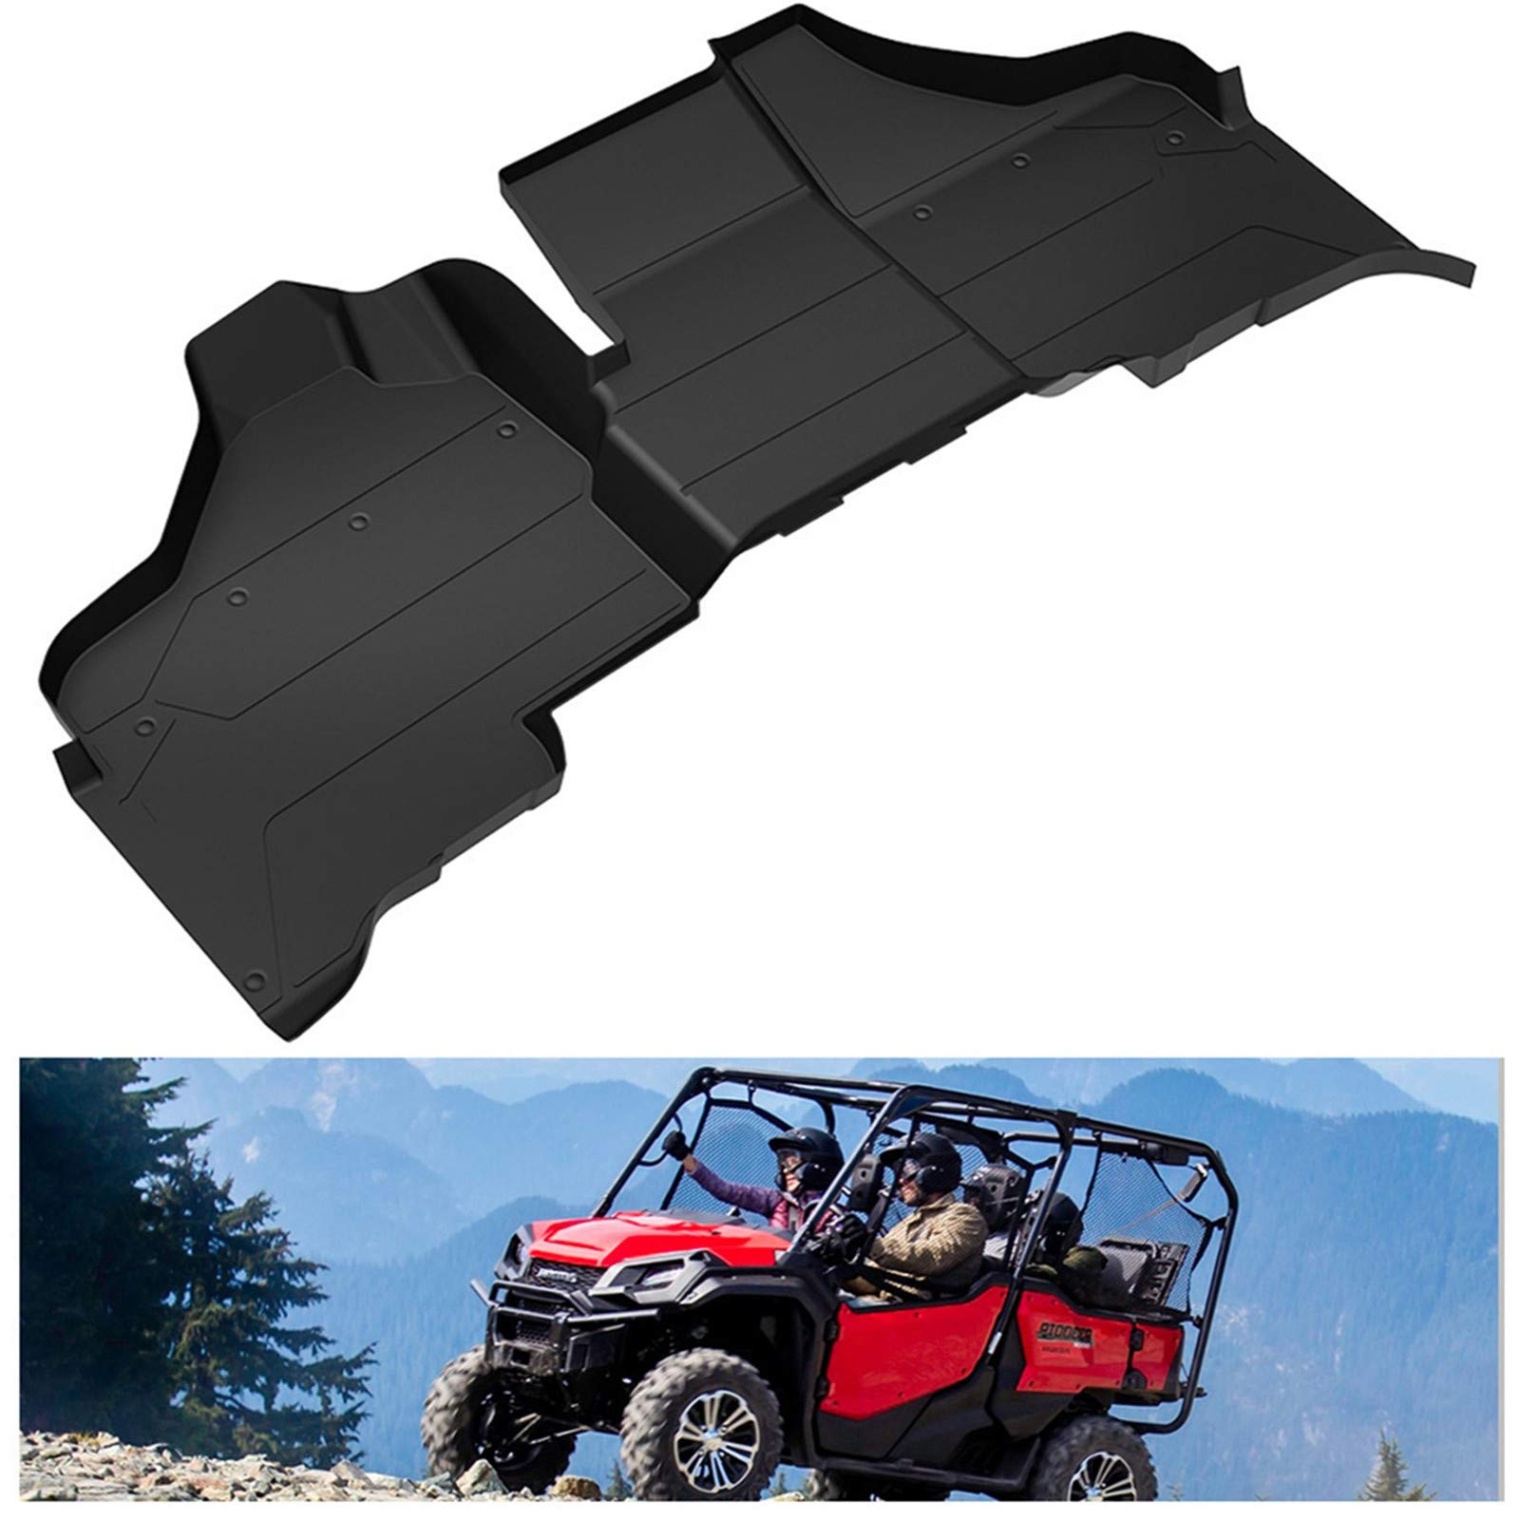 Upgrade Your Honda Pioneer 1000-5 With These Must-Have Accessories!